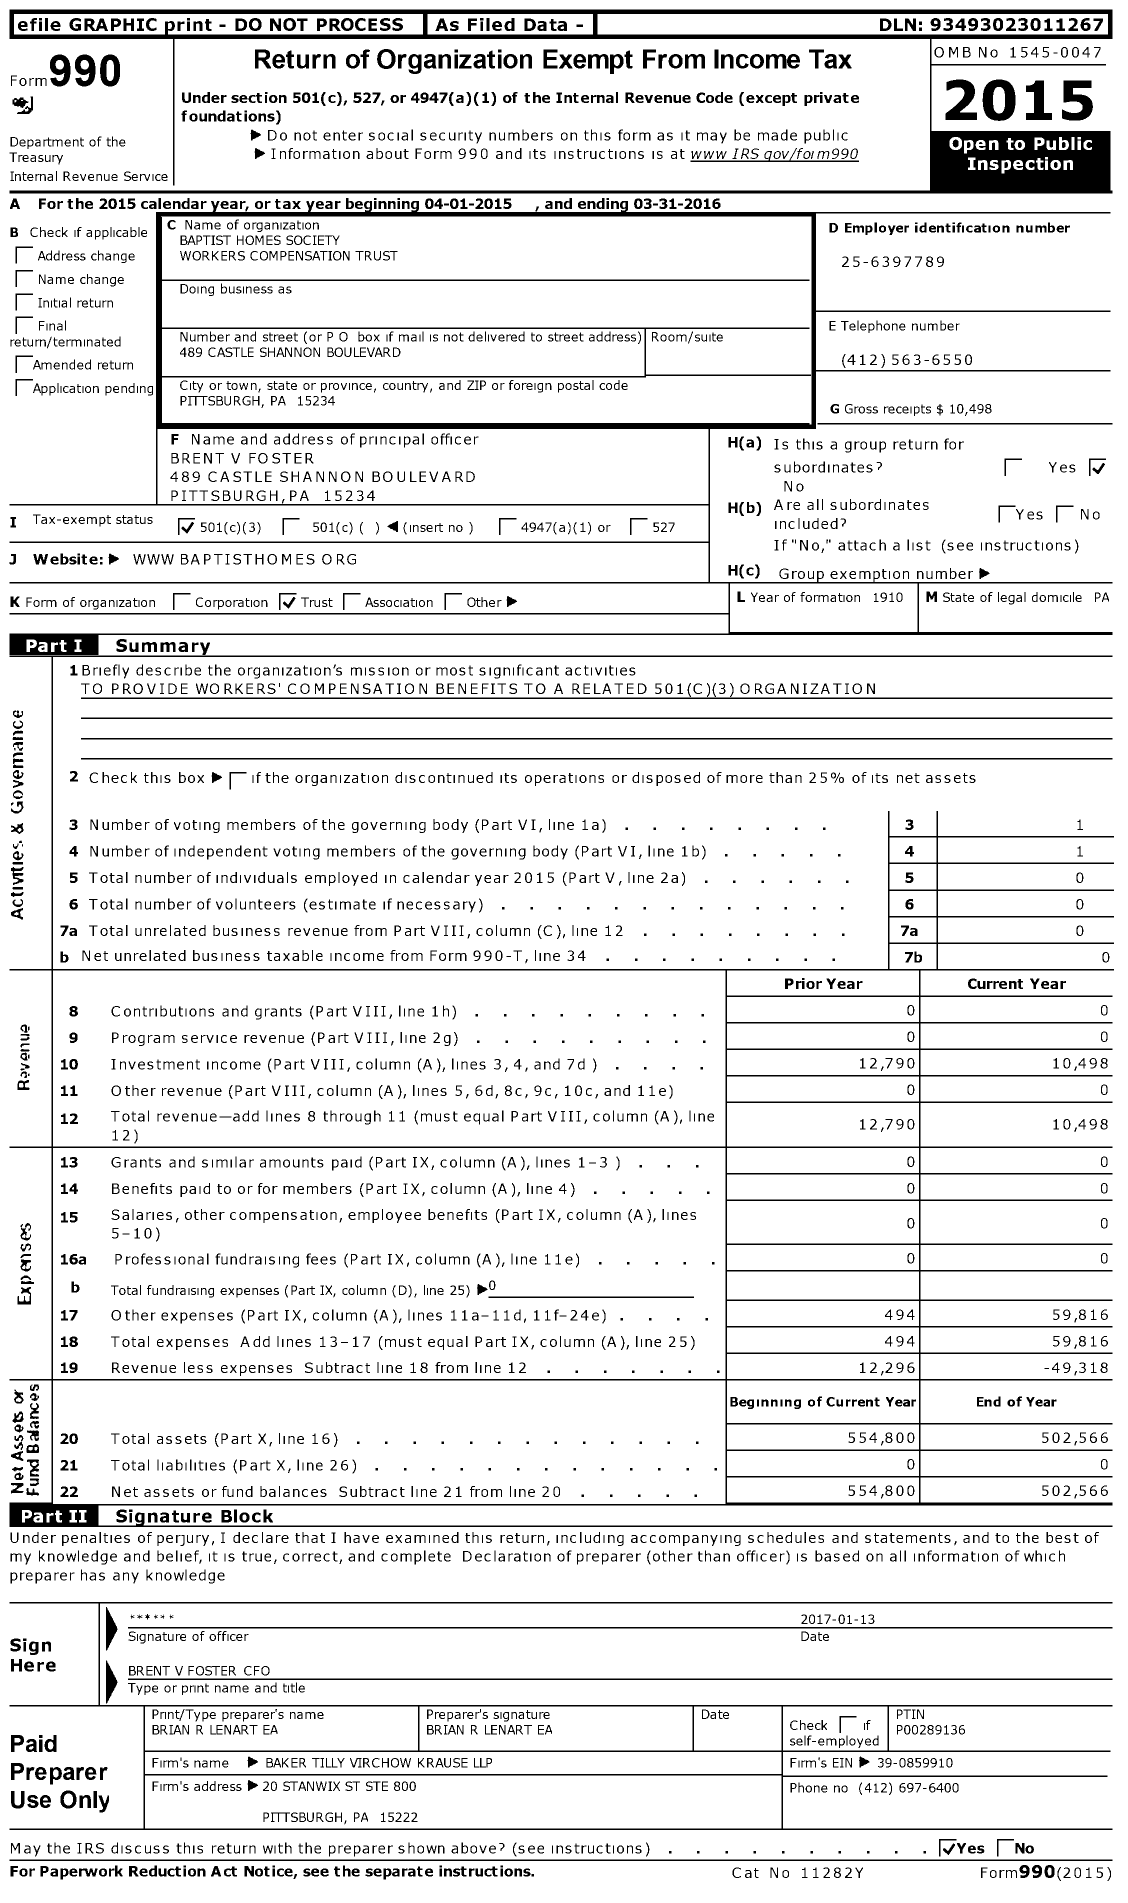 Image of first page of 2015 Form 990 for Baptist Homes Society Workers Compensation Trust